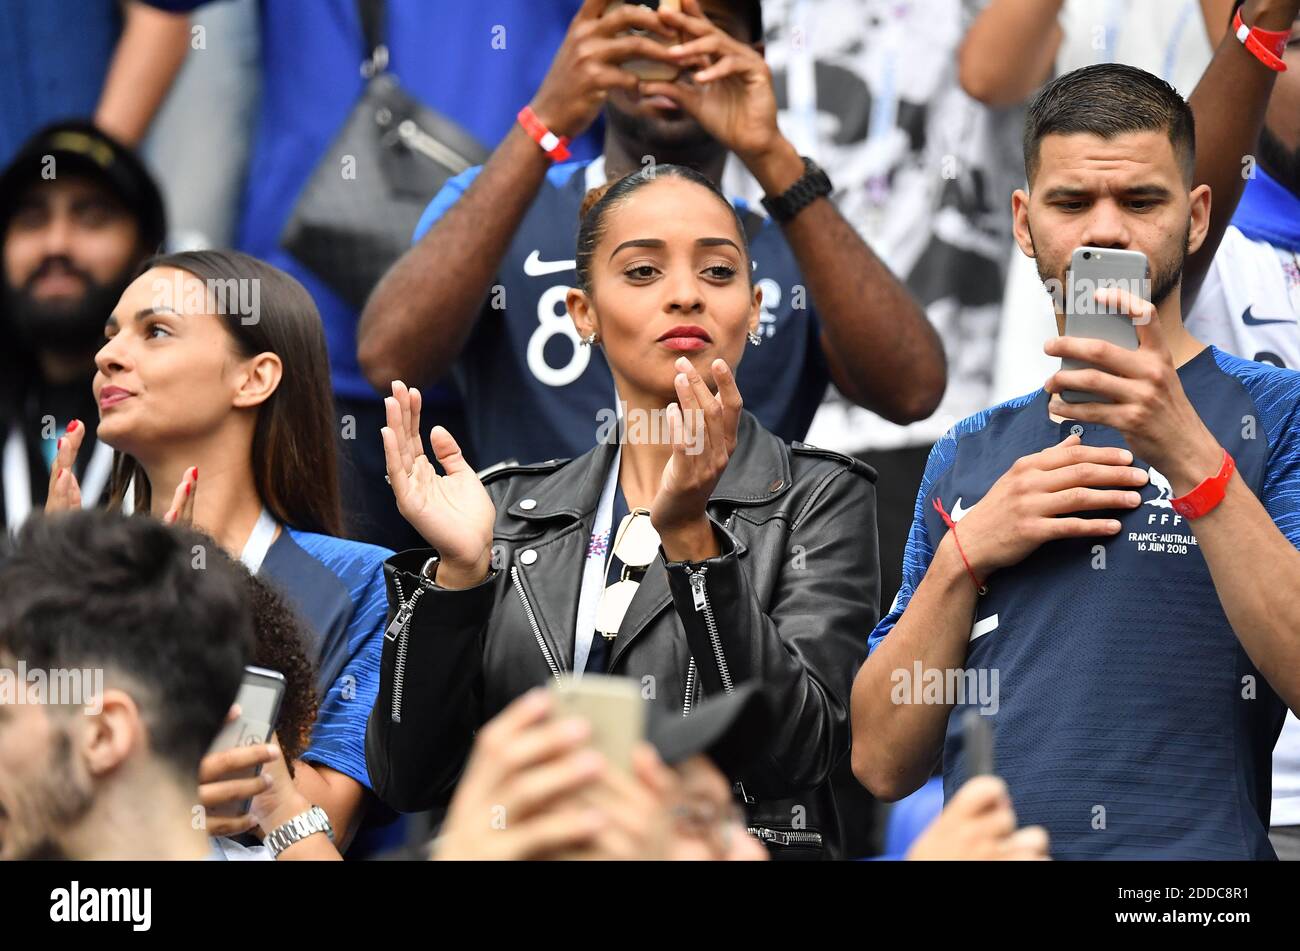 Sandra sister of Corentin Tolisso during the FIFA World Cup 2018 Round of 8 match at the Nizhny Novgorod Stadium Russia, on July 6, 2018. . Photo by Christian Liewig/ABACAPRESS.COM Stock Photo